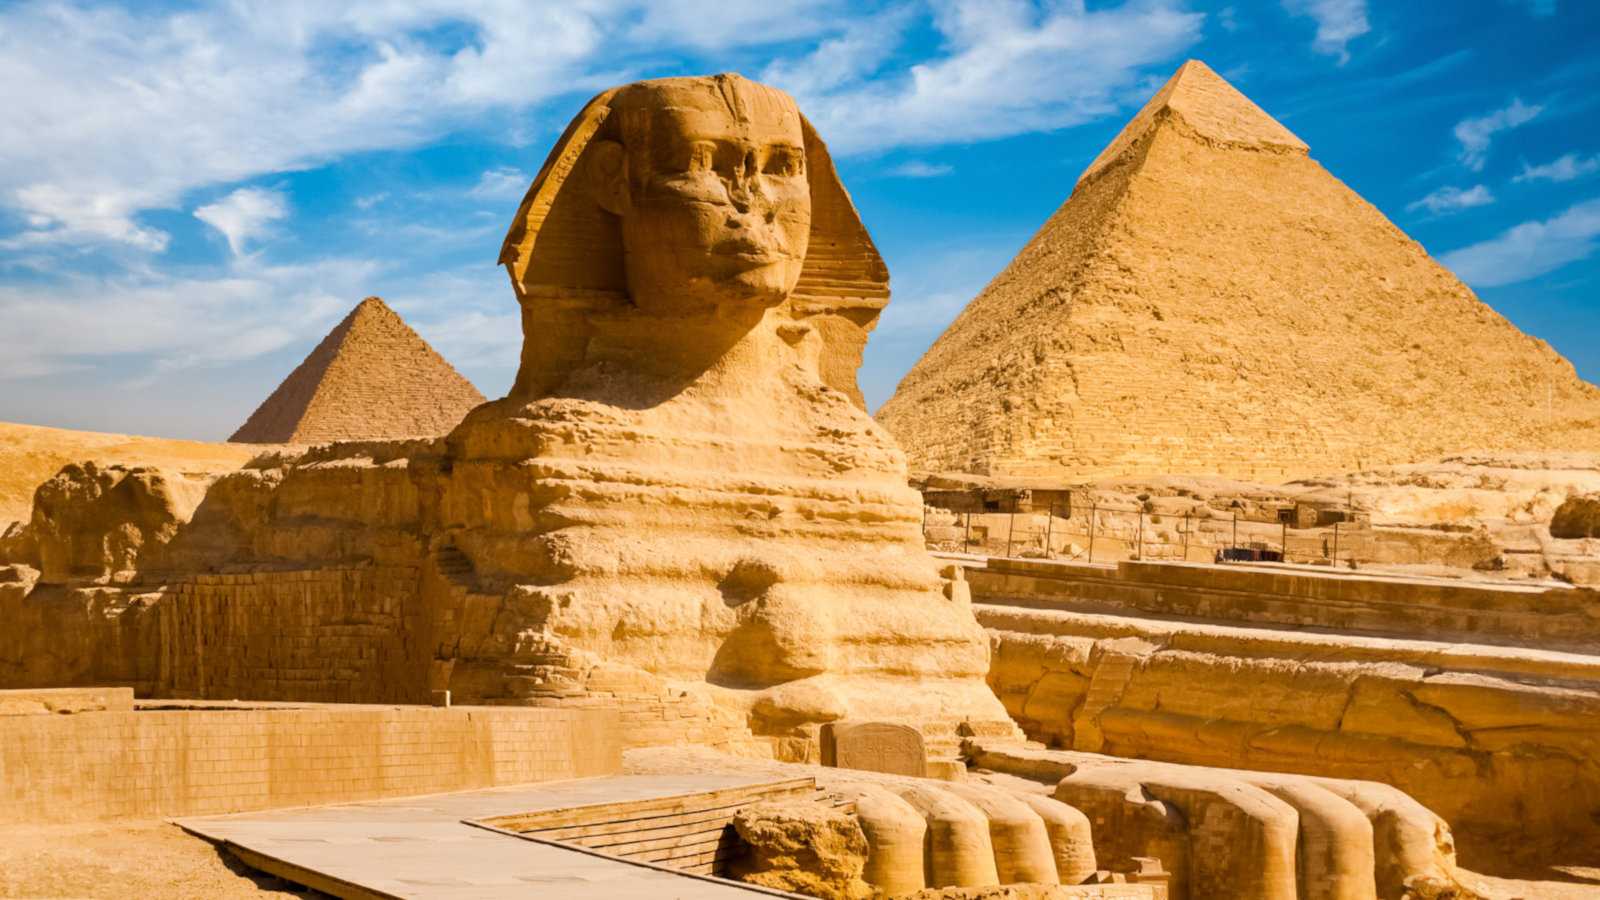 A middle distance shot of the Sphinx and pyramids in the background on a sunny day with blue sky behind the yellow structures.